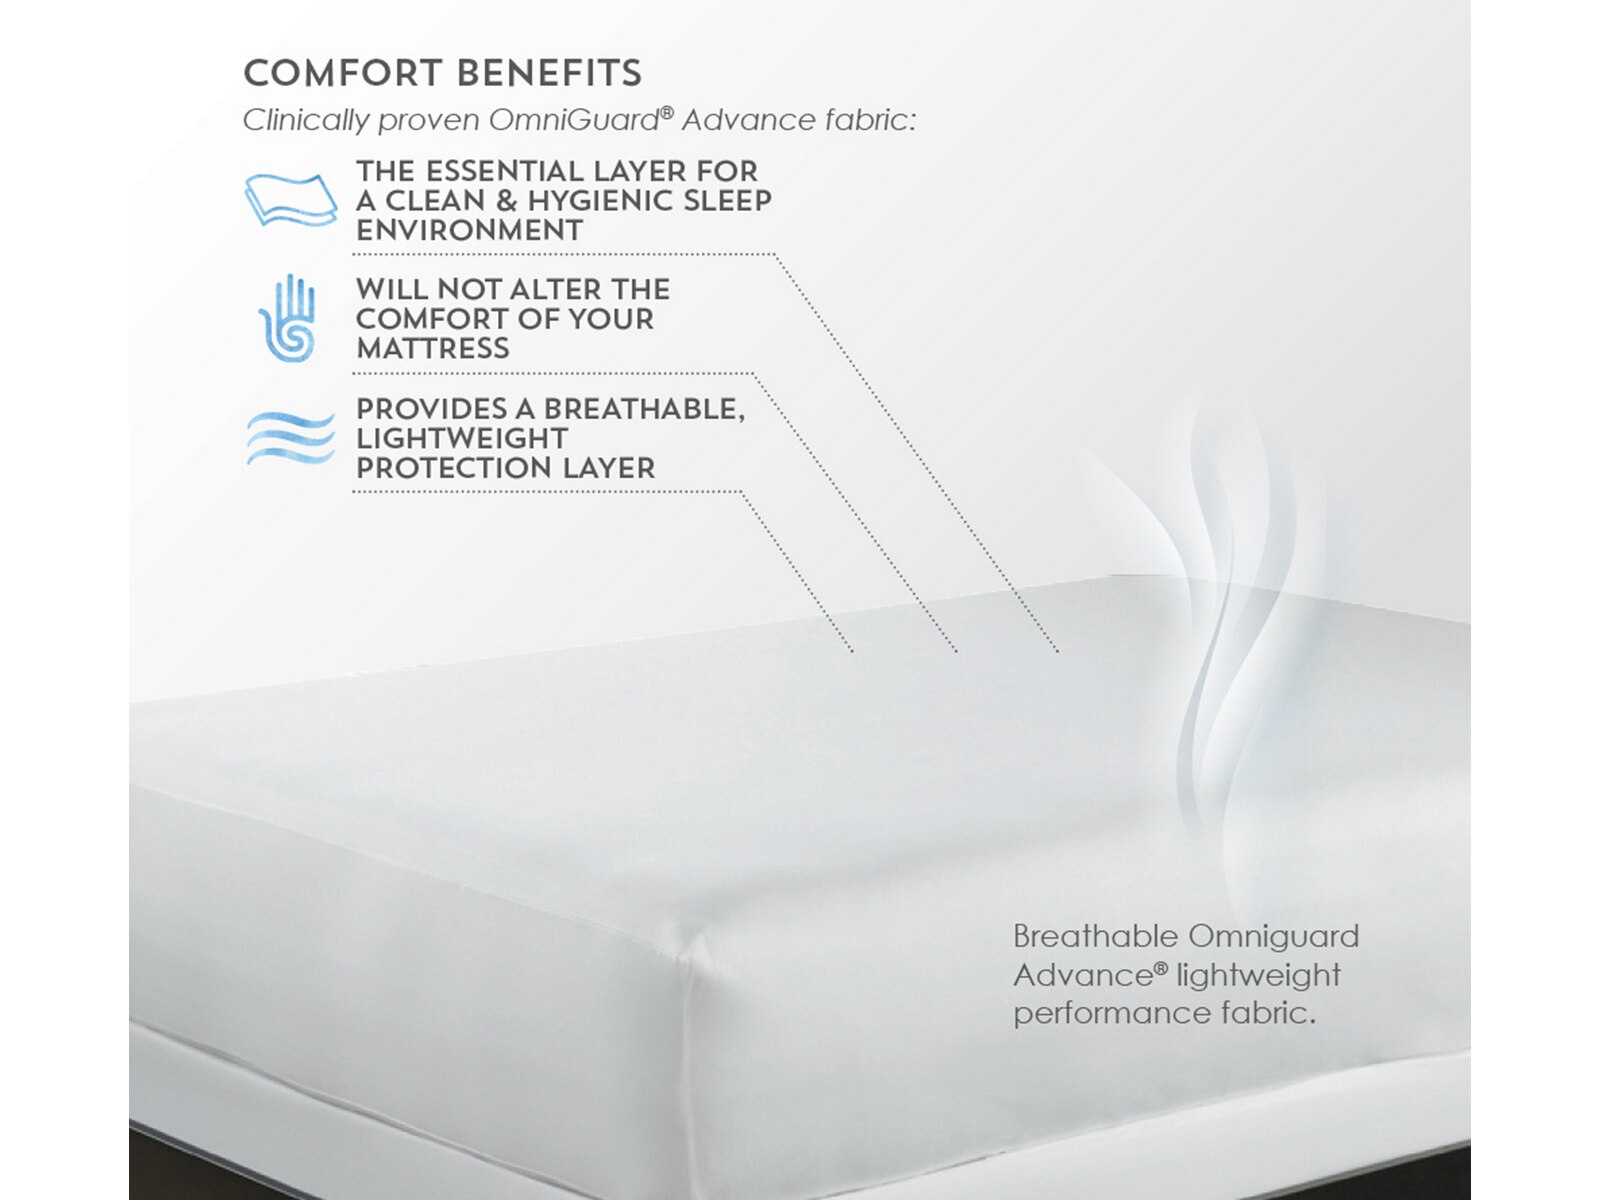 purecare aromatherapy 5 sided mattress protector